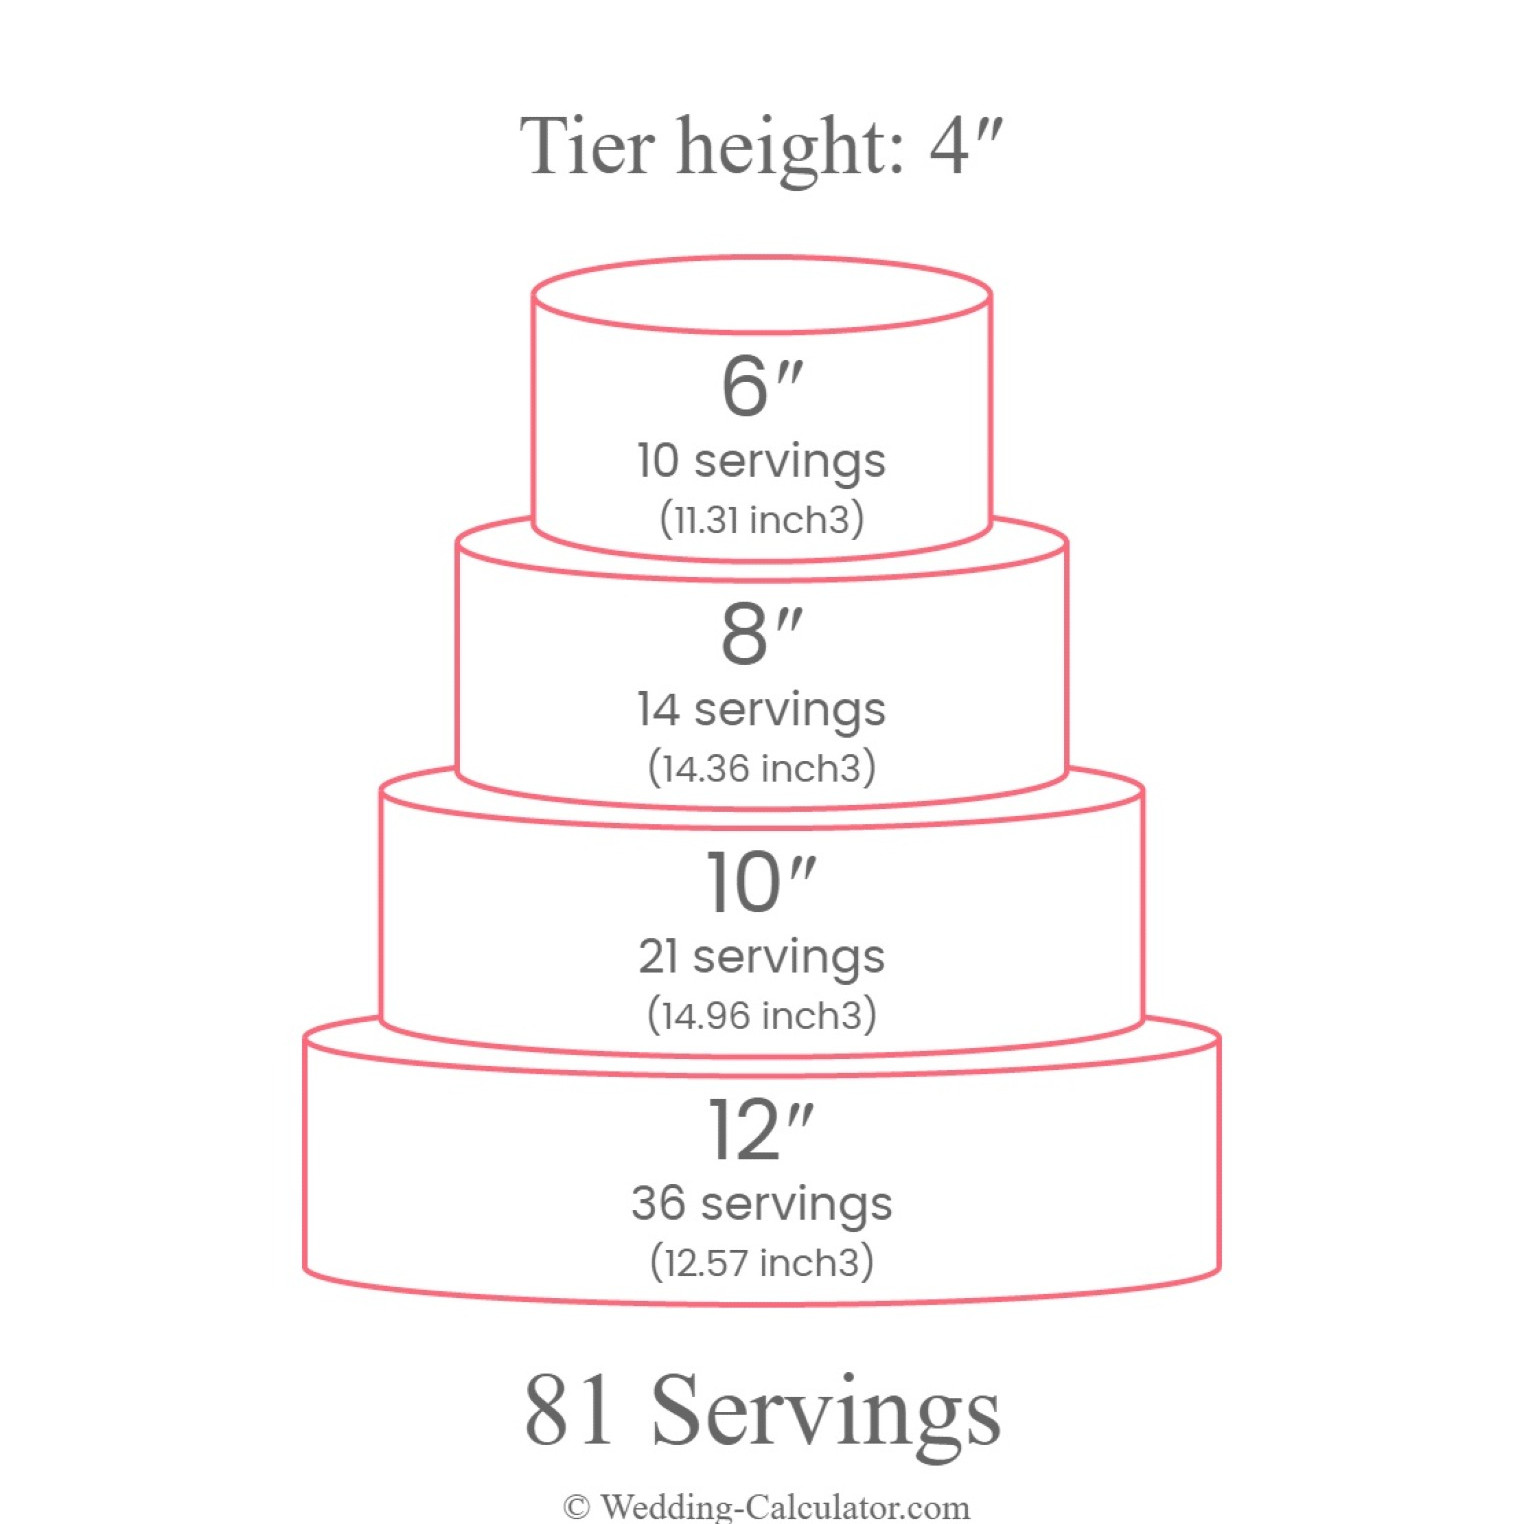 An alternative wedding cake size for 80 guests